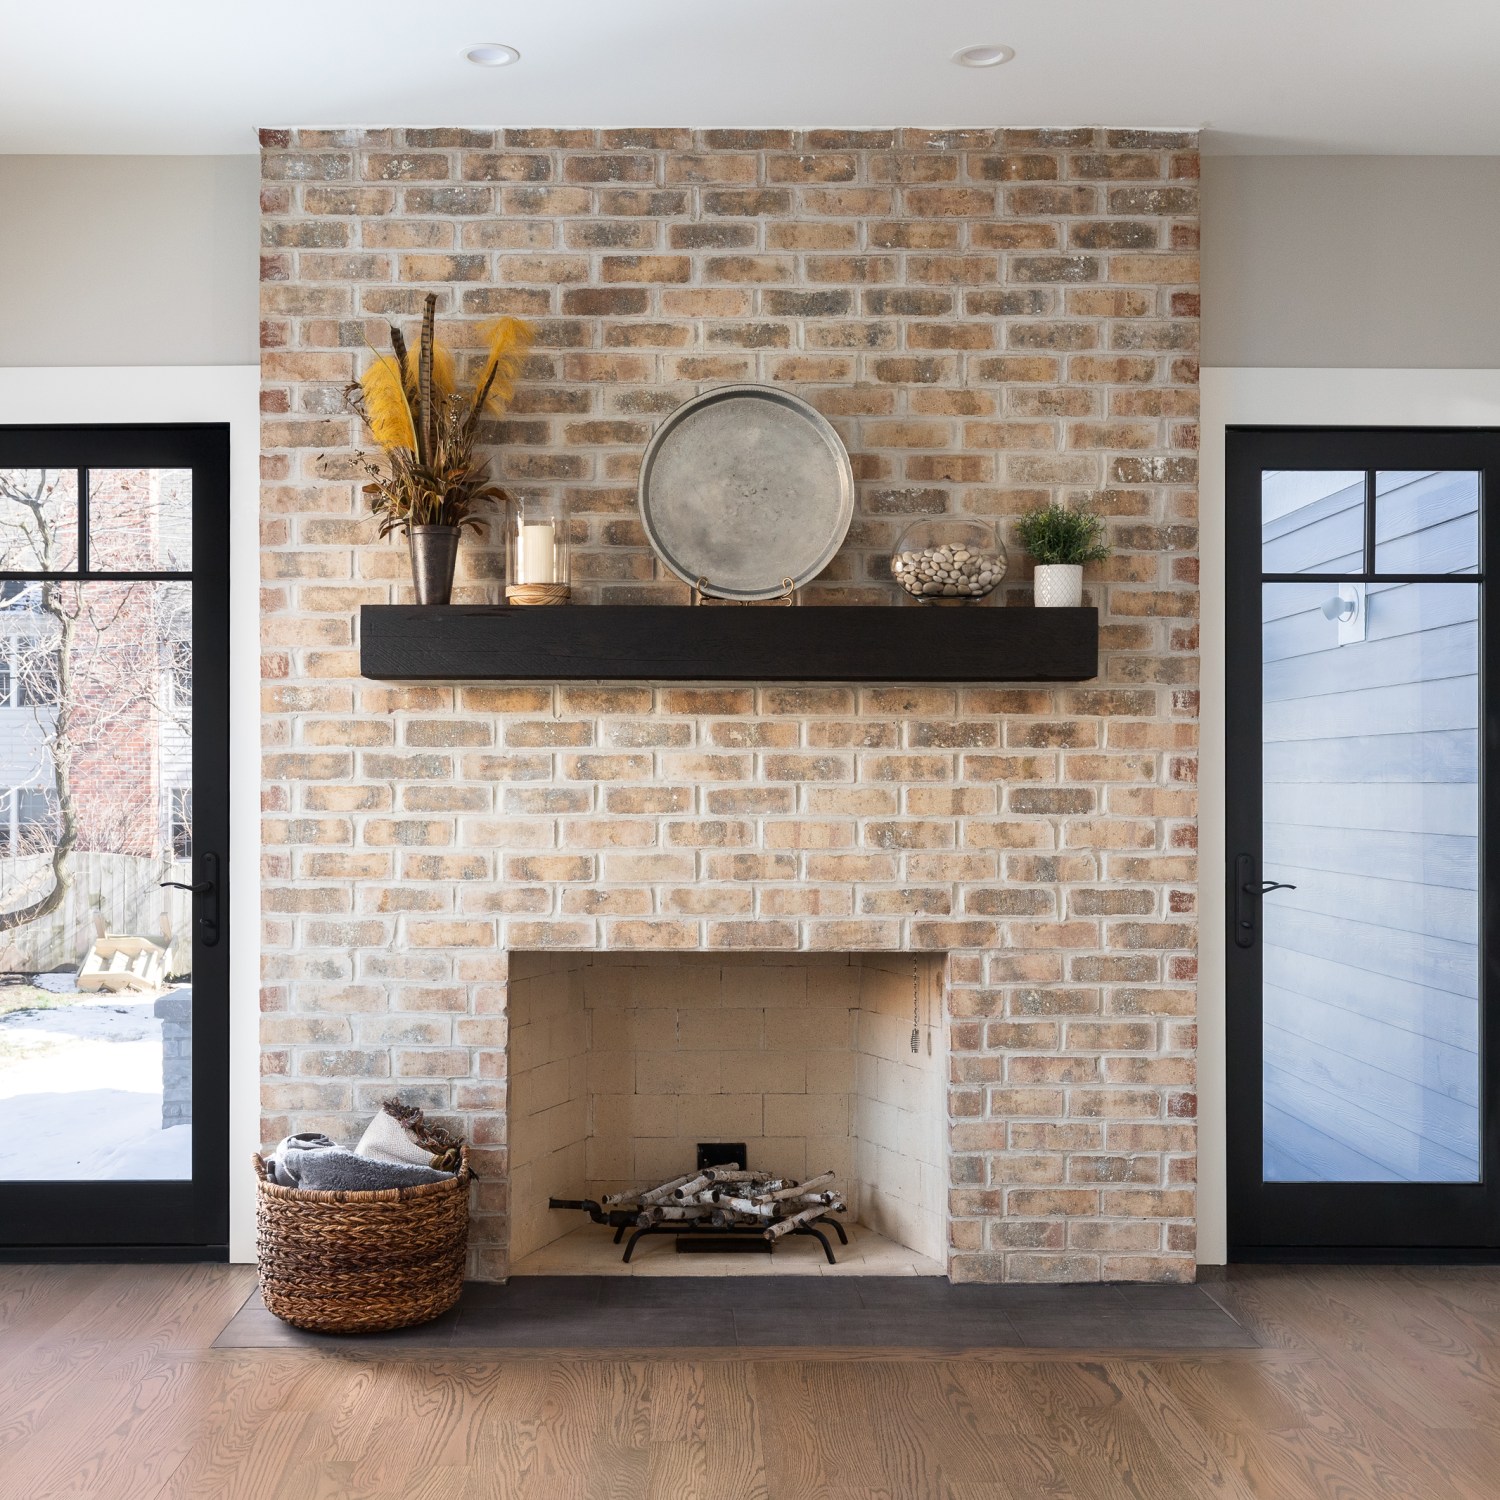 A beautiful, cozy fireplace with natural brick and a wood mantle shows a fireplace that's an option for painting.